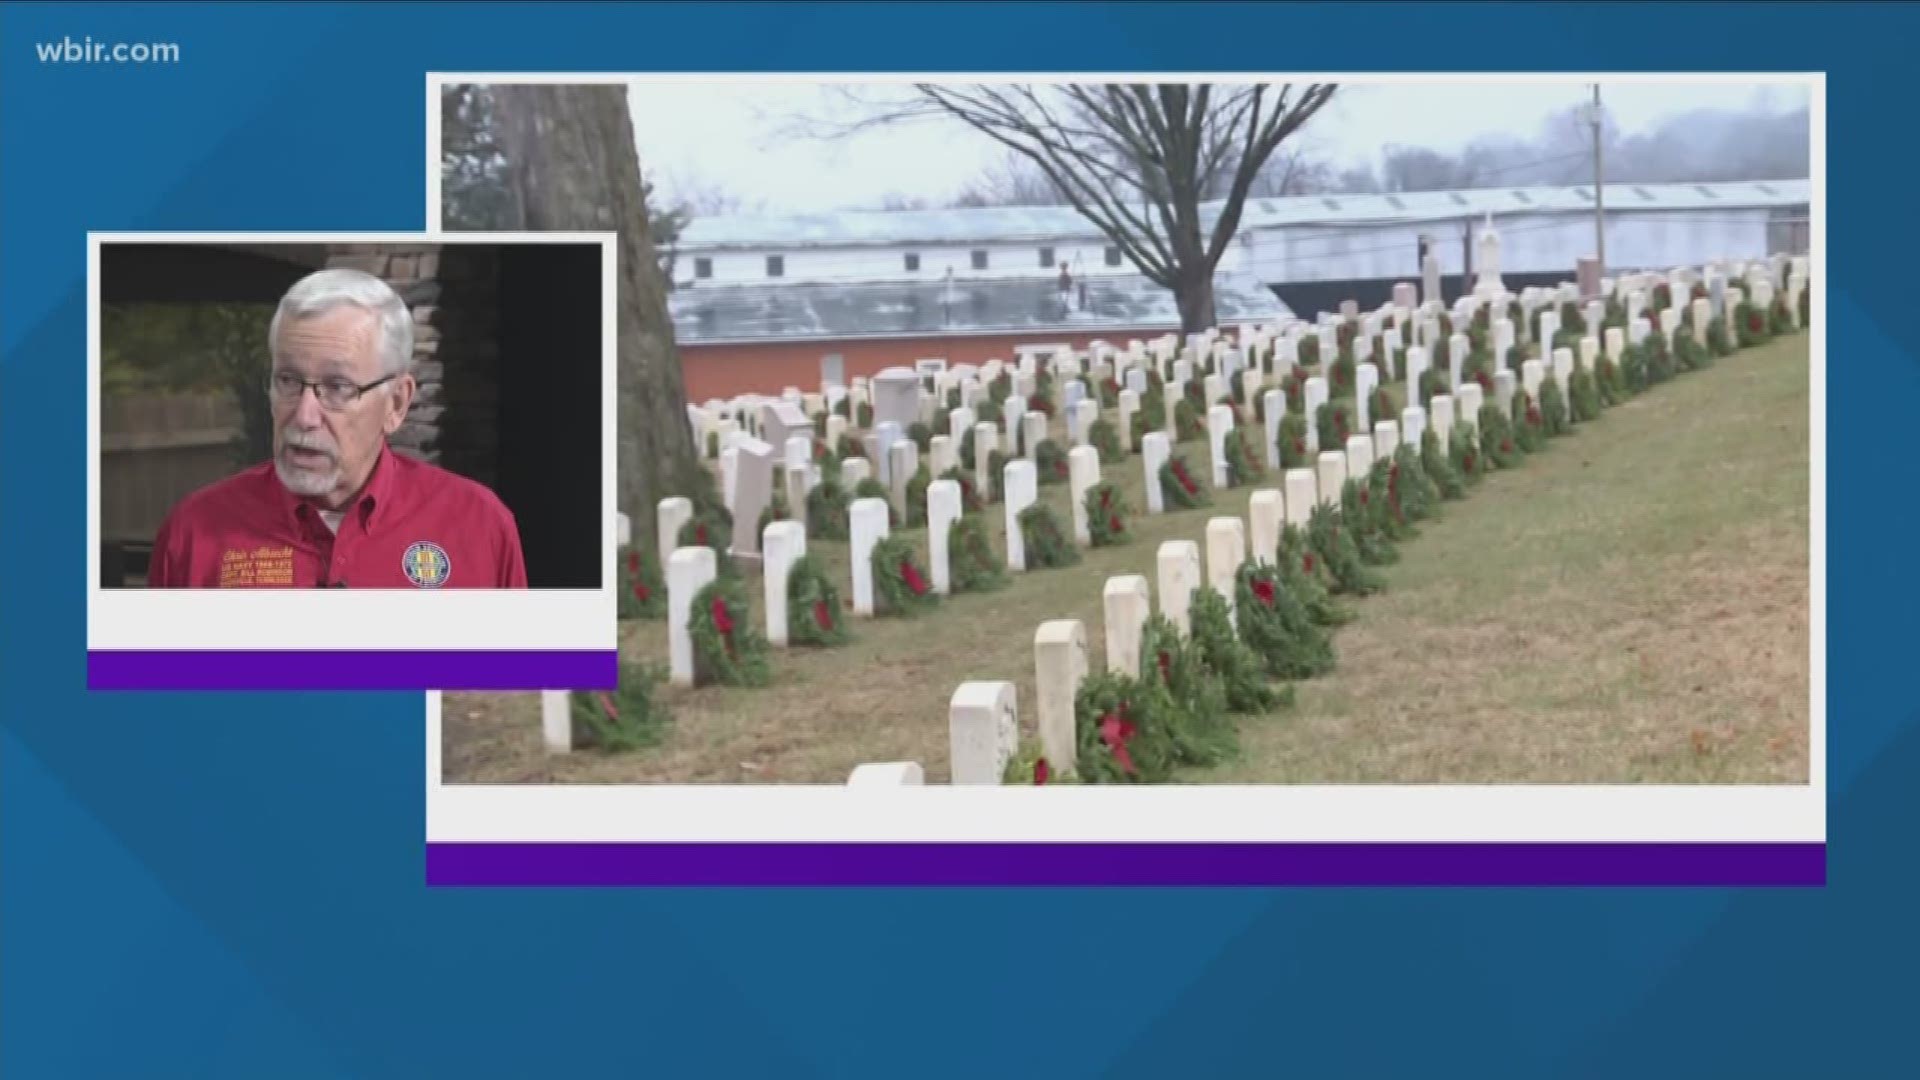 The group wants to put a wreath on the grave of every American veteran for the holidays. Here's how you can help.